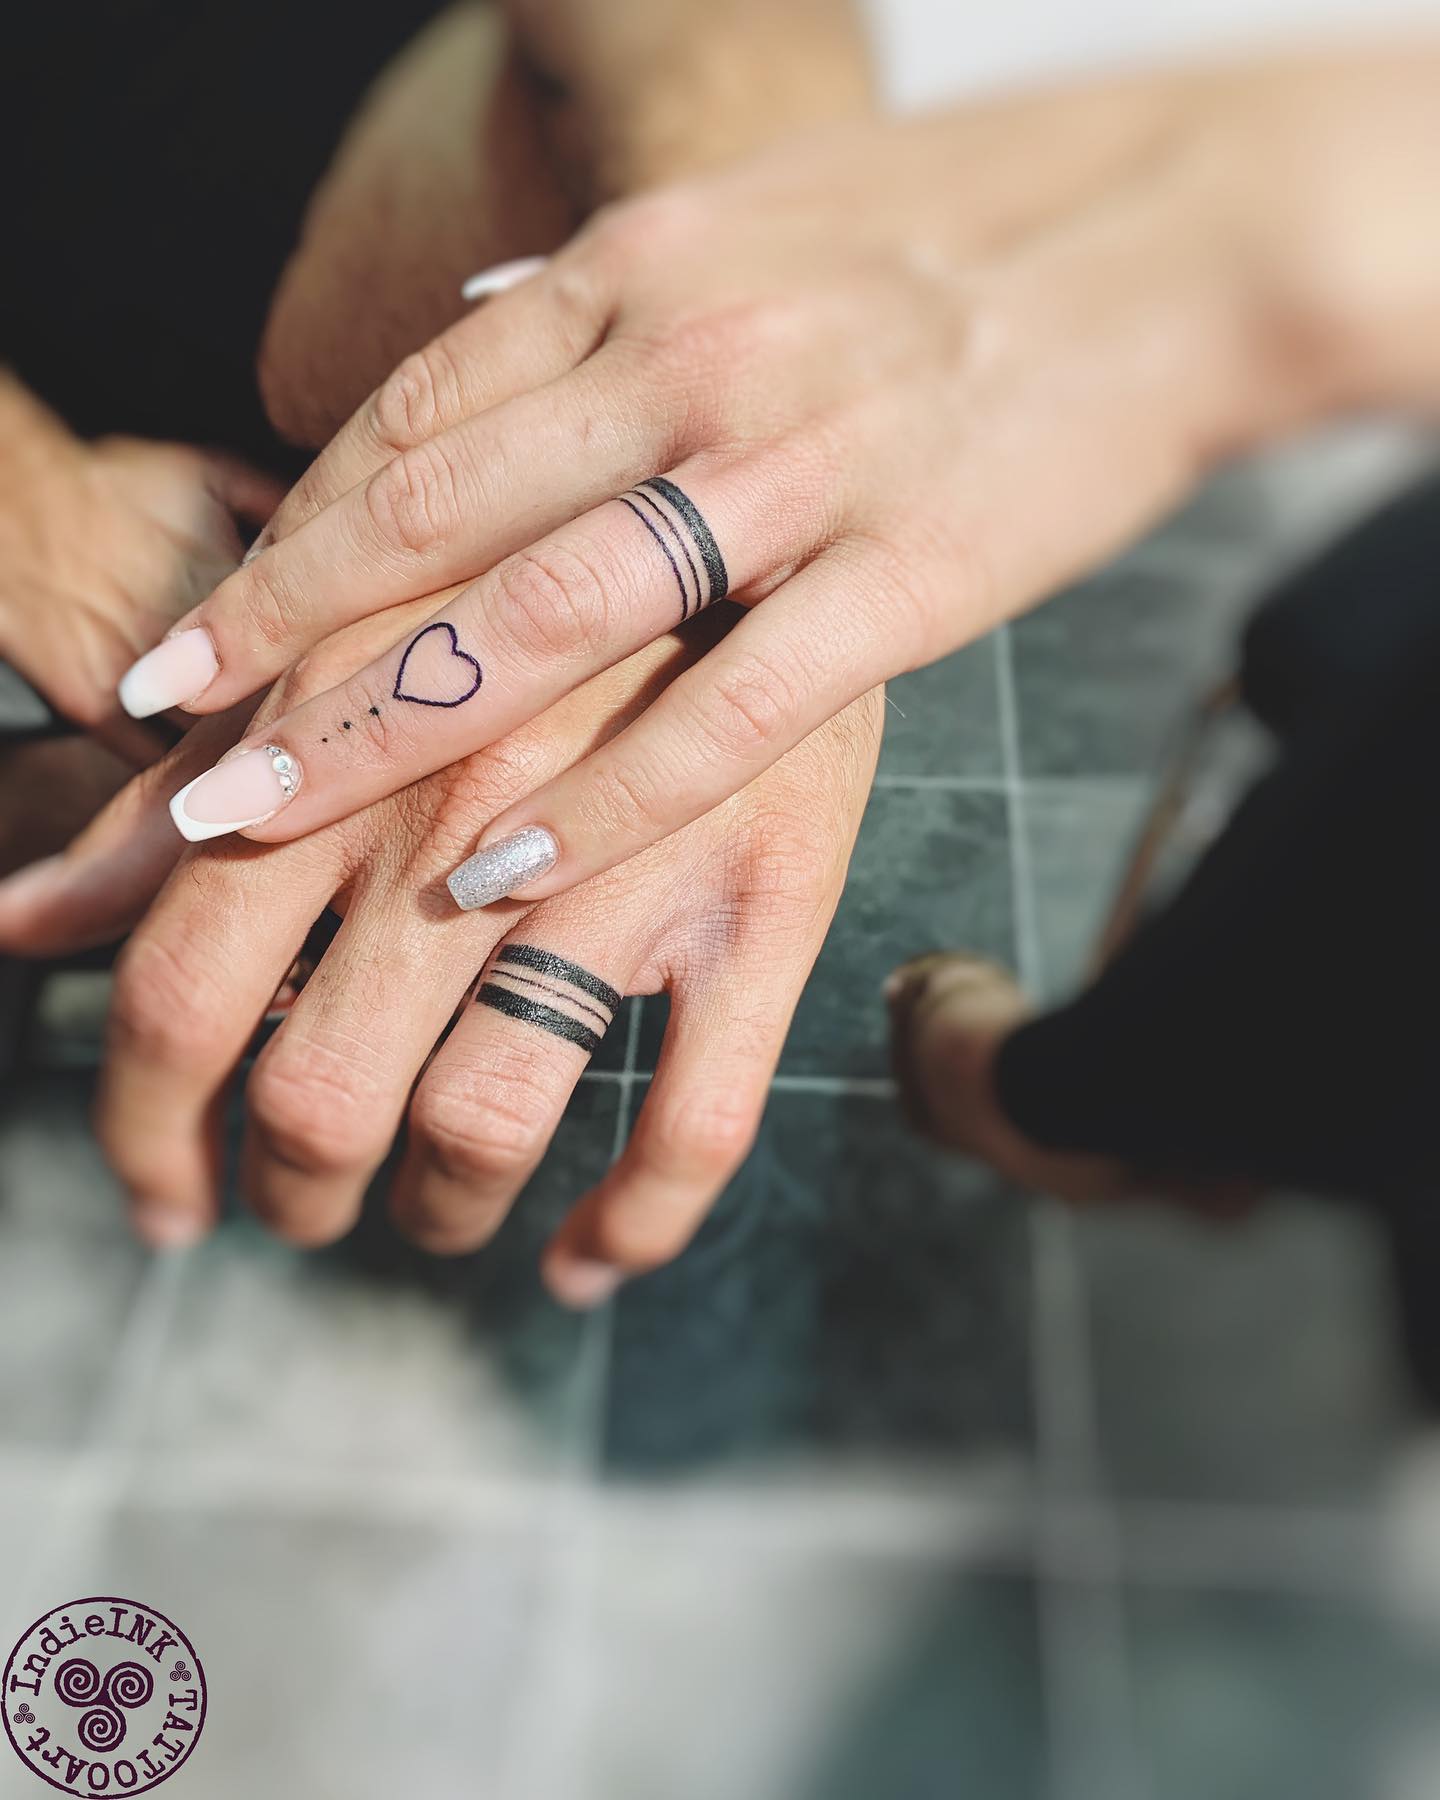 21 Wedding Band Tattoo Ideas Instead Of A Ring  TattooGlee  Wedding  band tattoo Wedding ring finger tattoos Wedding finger tattoos